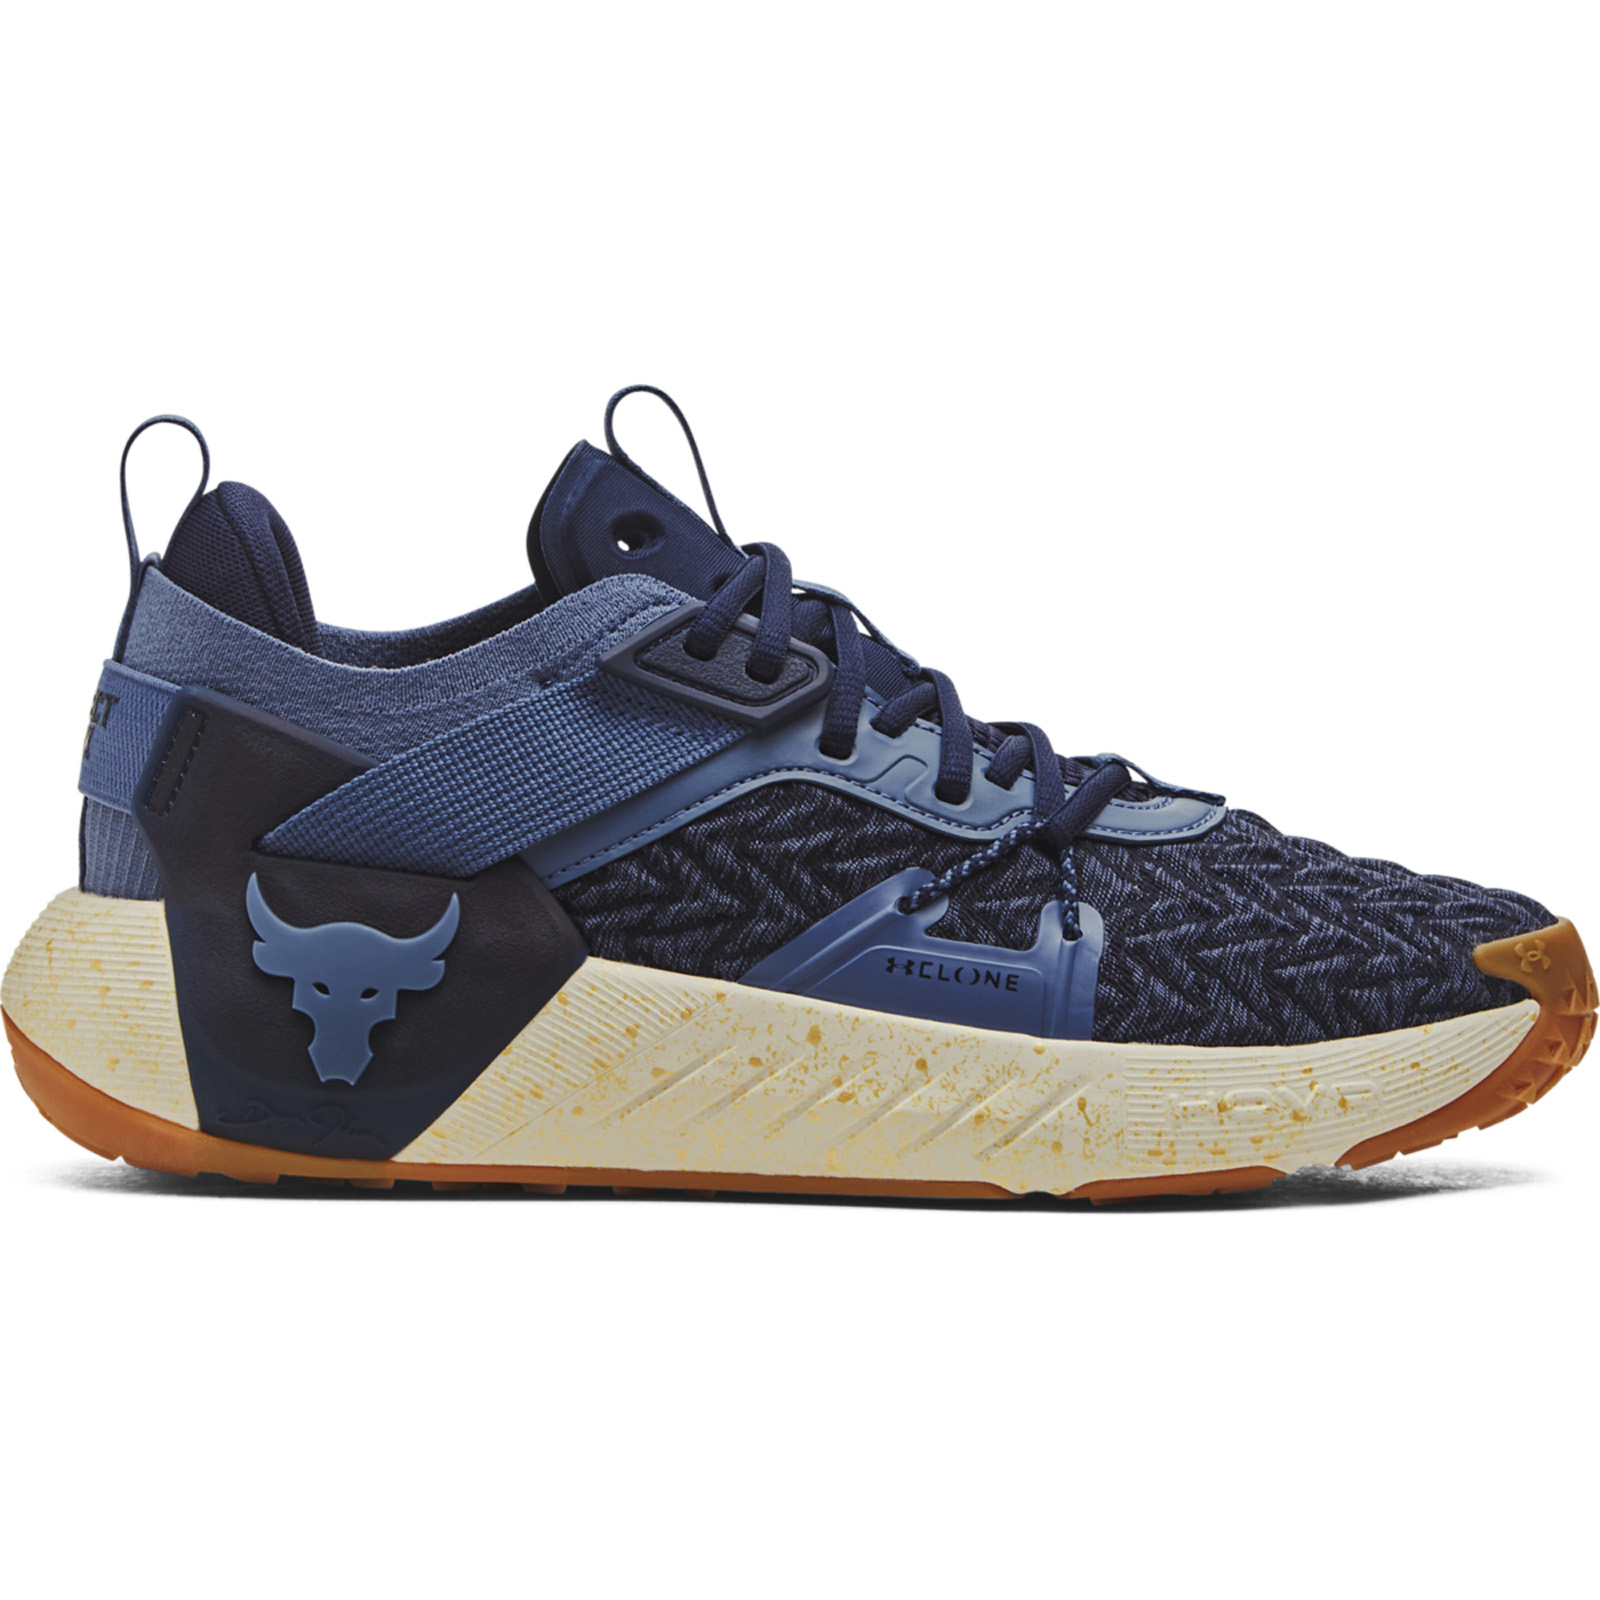 Under Armour - 3026534 UA PROJECT ROCK 6 - Hushed Blue/White Clay/Hushed Blue Ανδρικά > Παπούτσια > Αθλητικά > Παπούτσι Low Cut